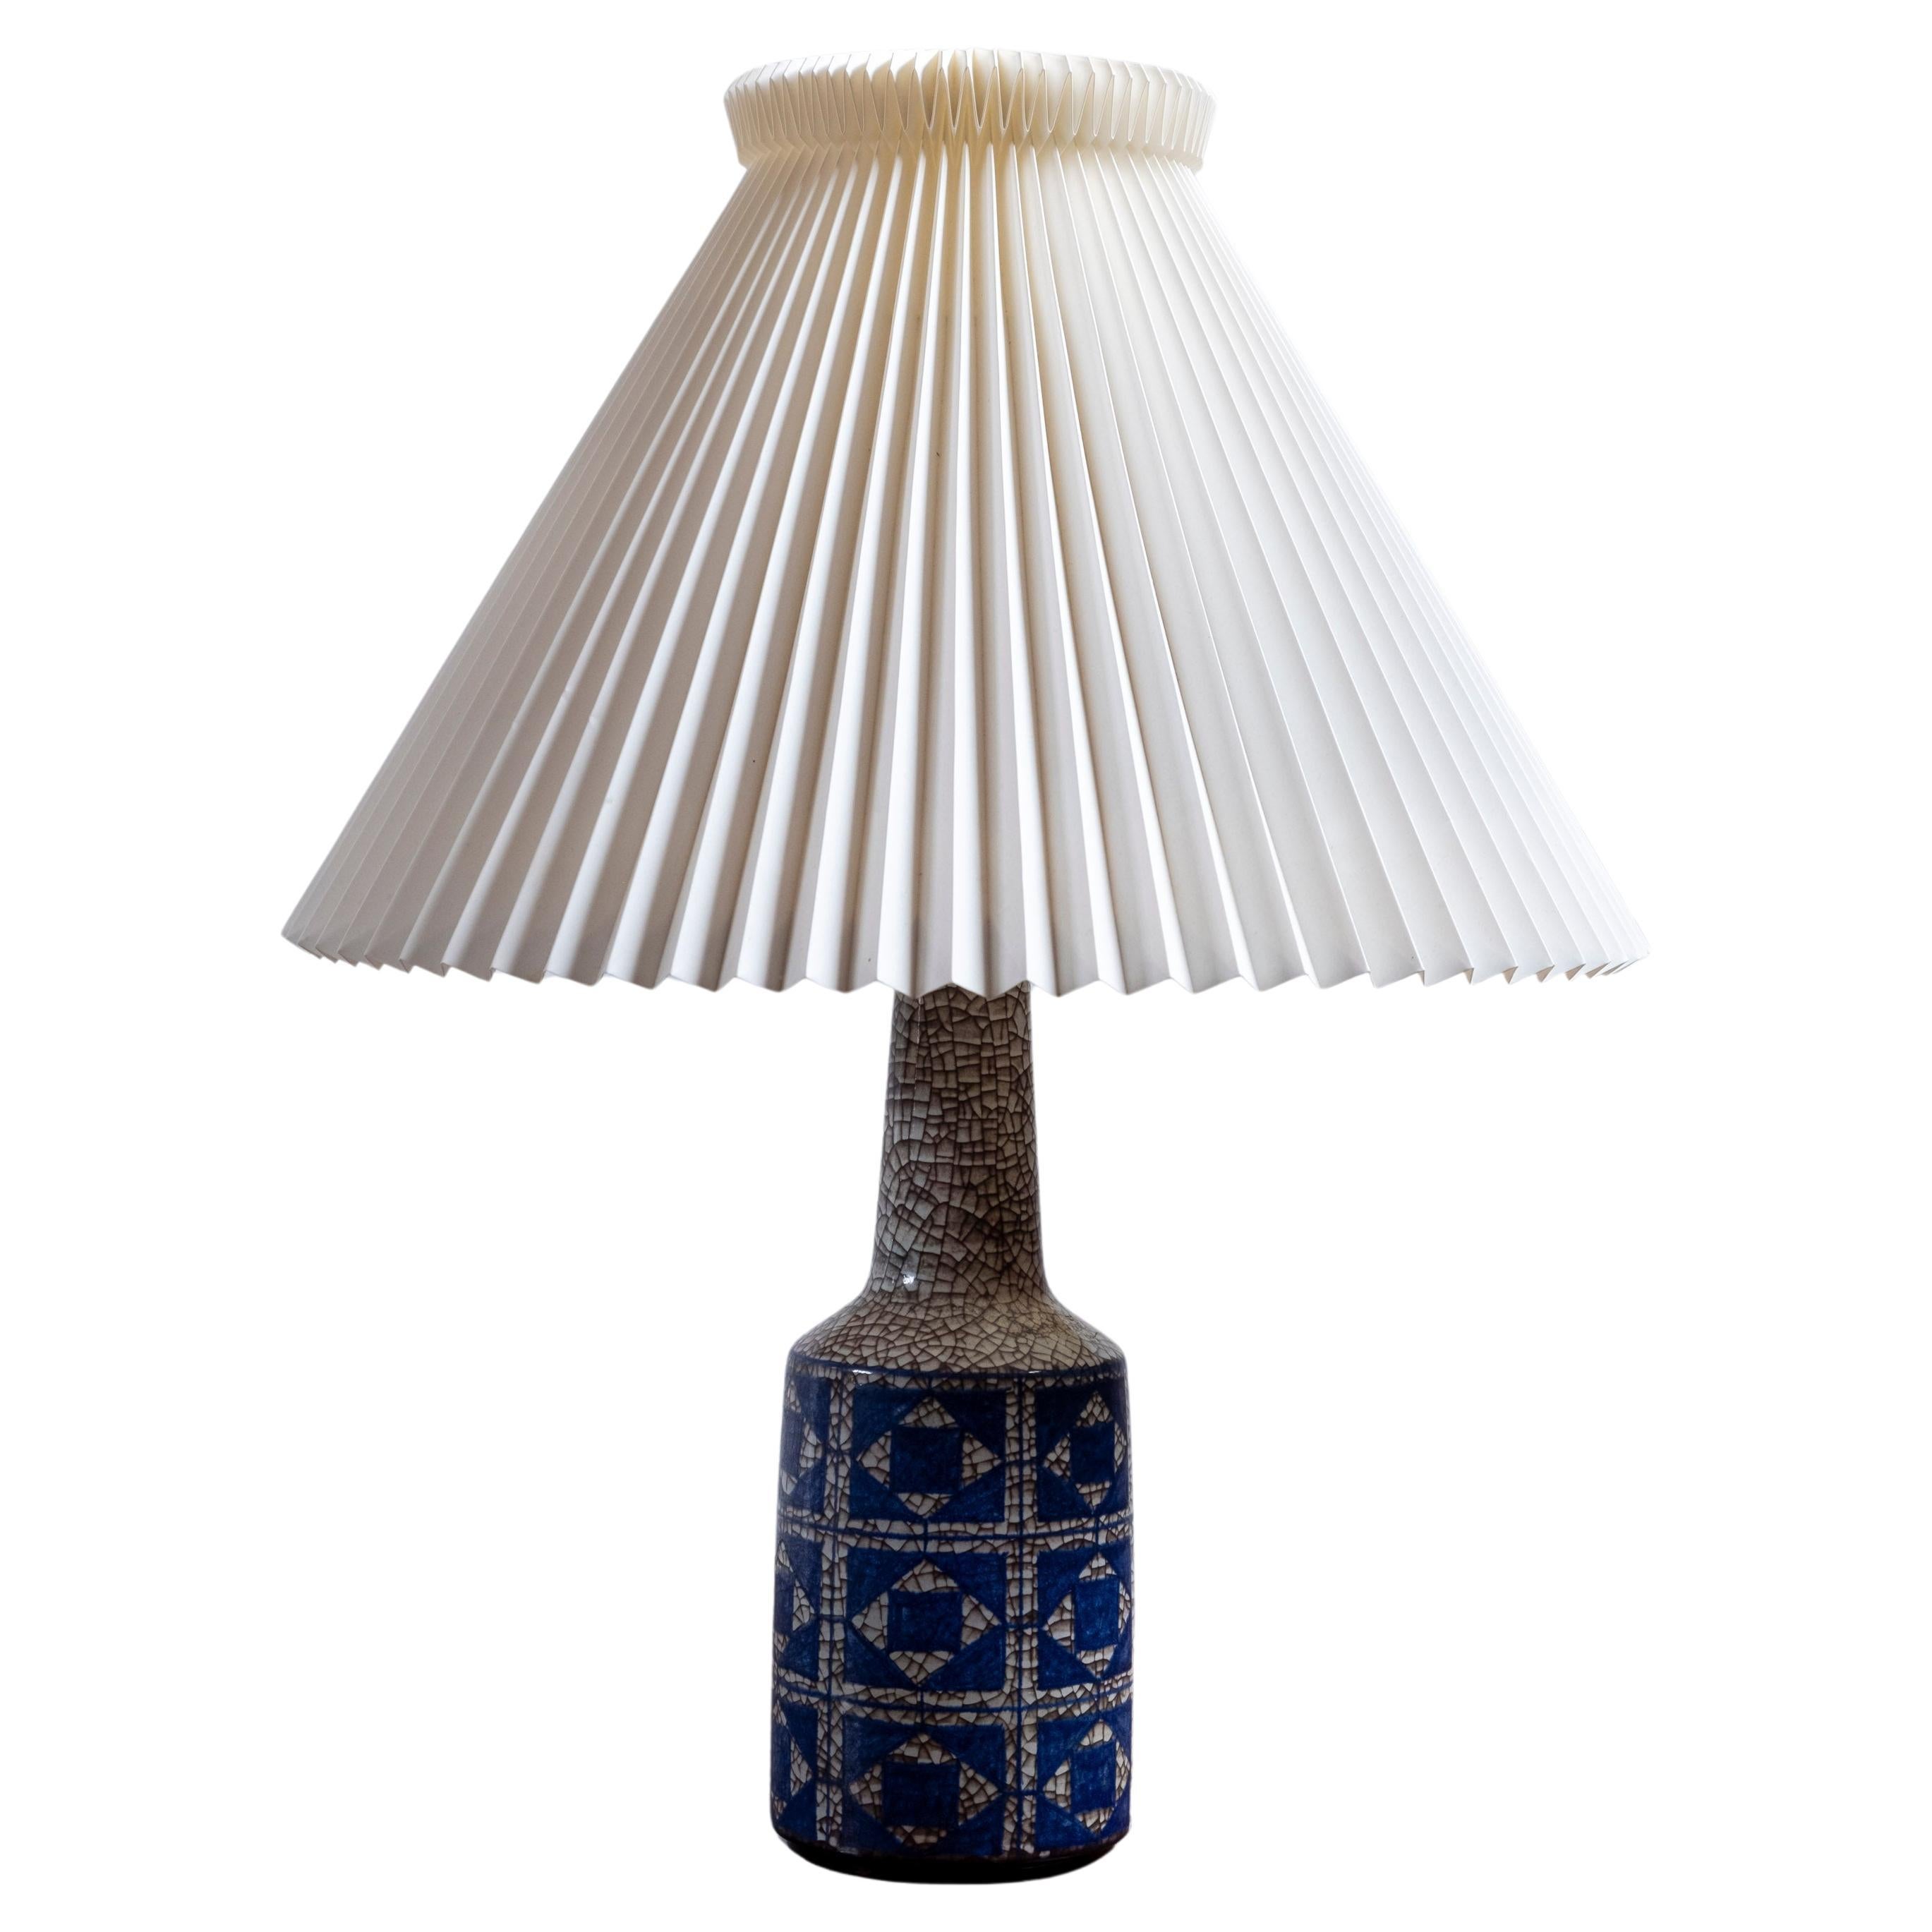 Ceramic Table Lamp by Michael Andersen & Sons and Marianne Starck, 1950s Denmark For Sale